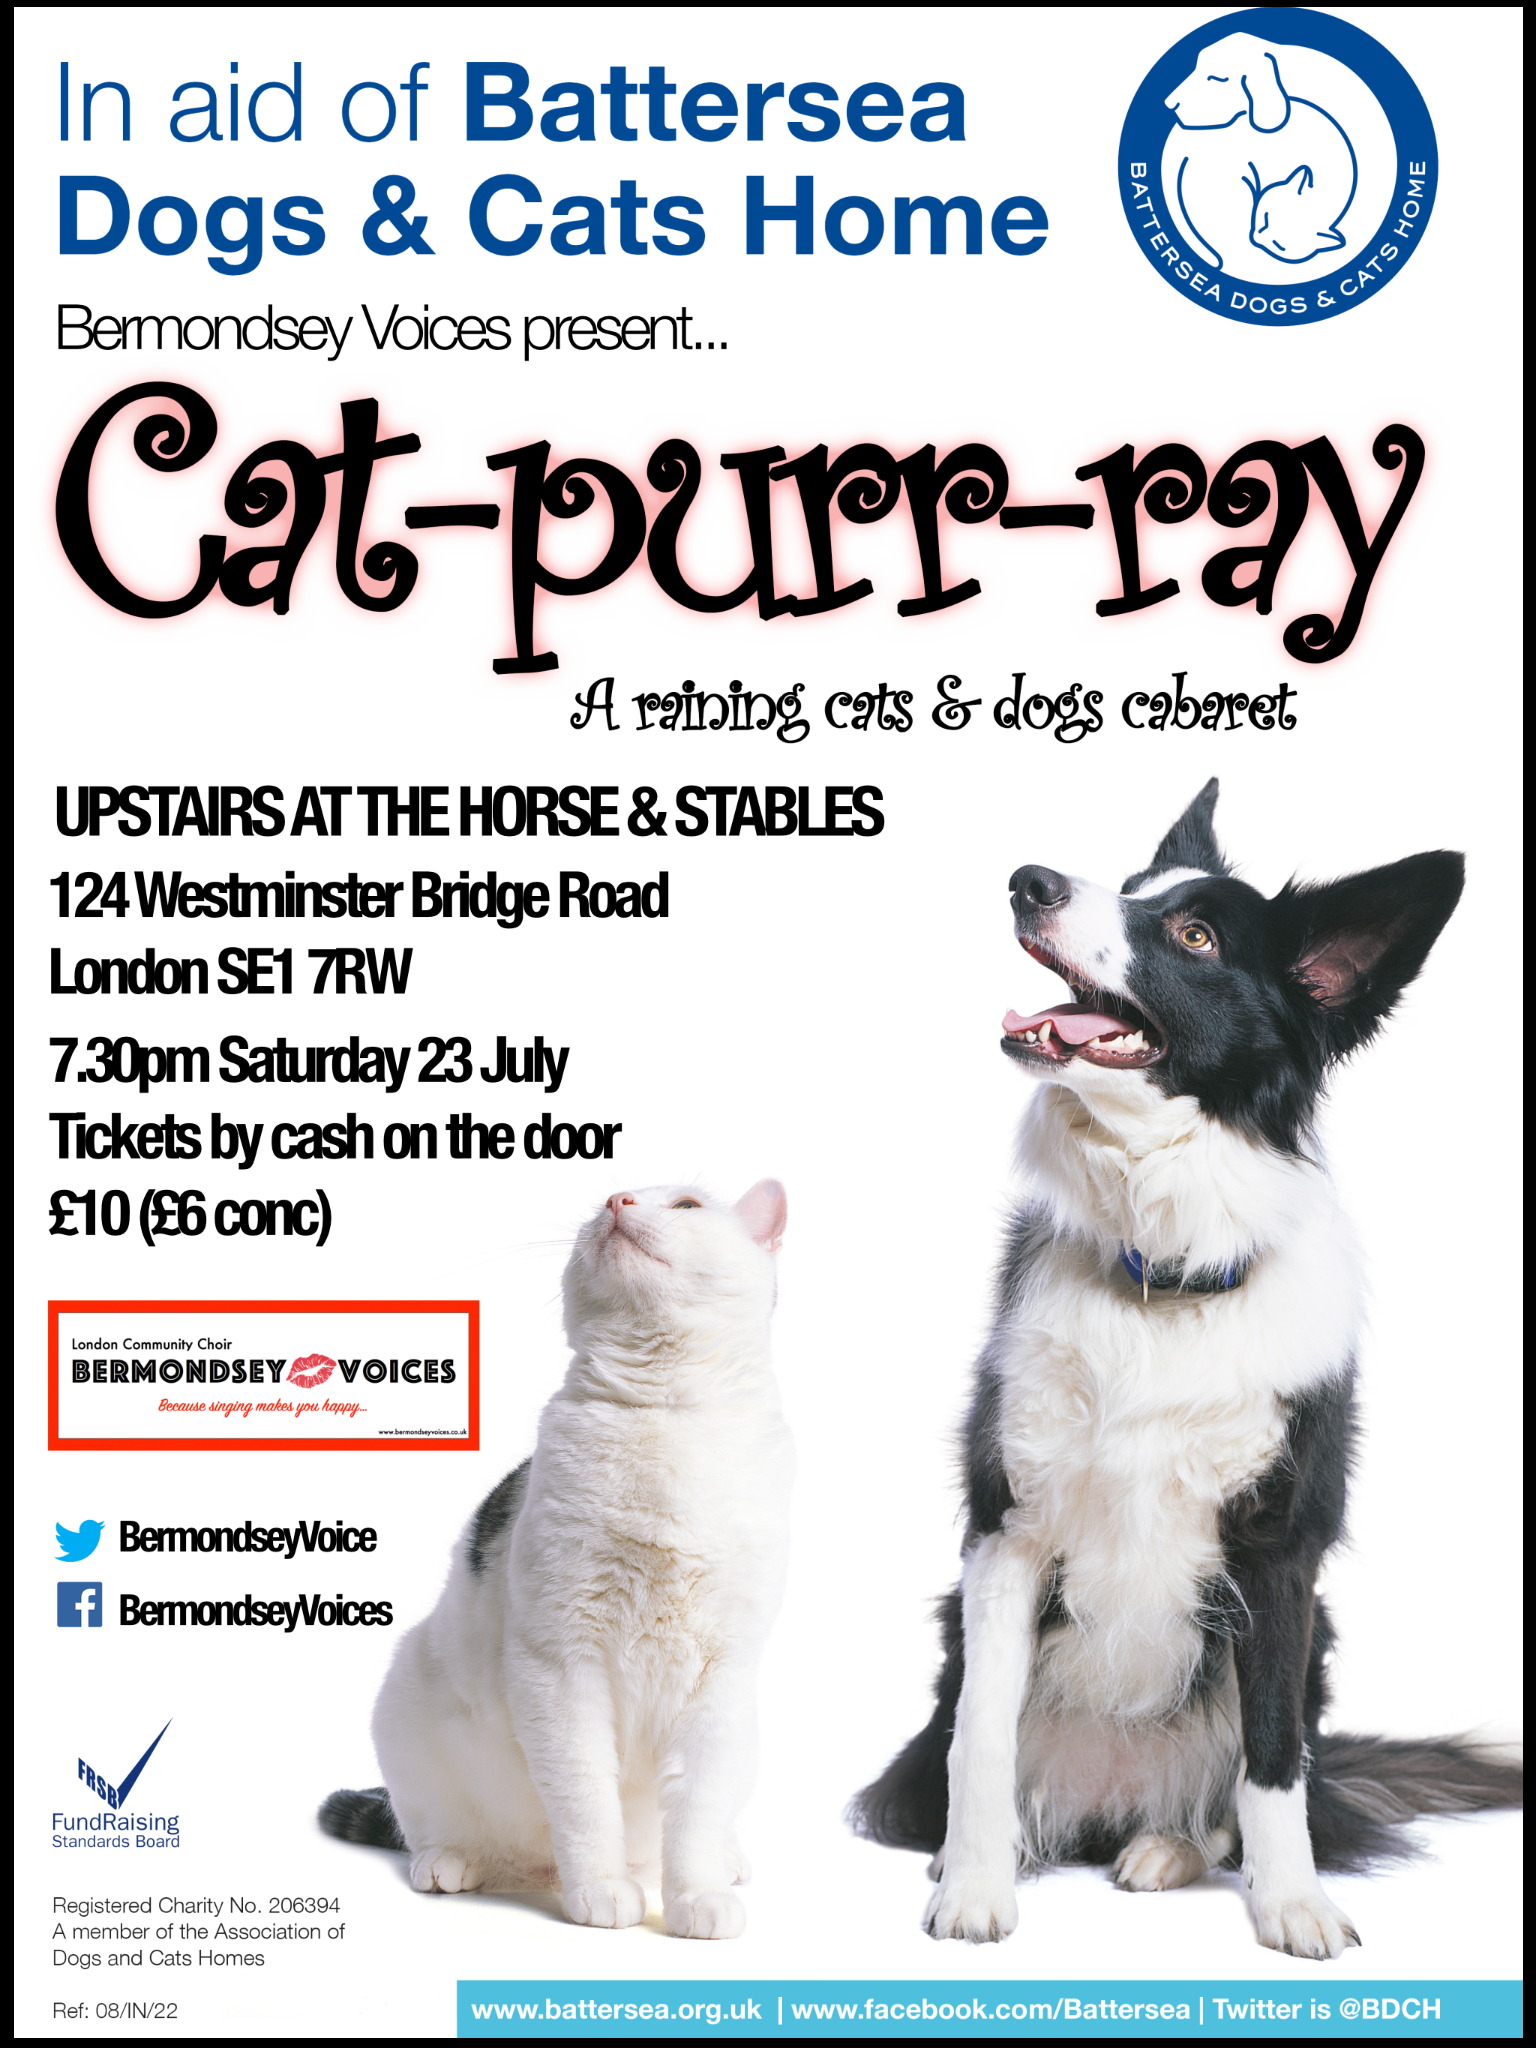 Bermondsey Voices present... Cat-purr-ray at The Horse & Stables